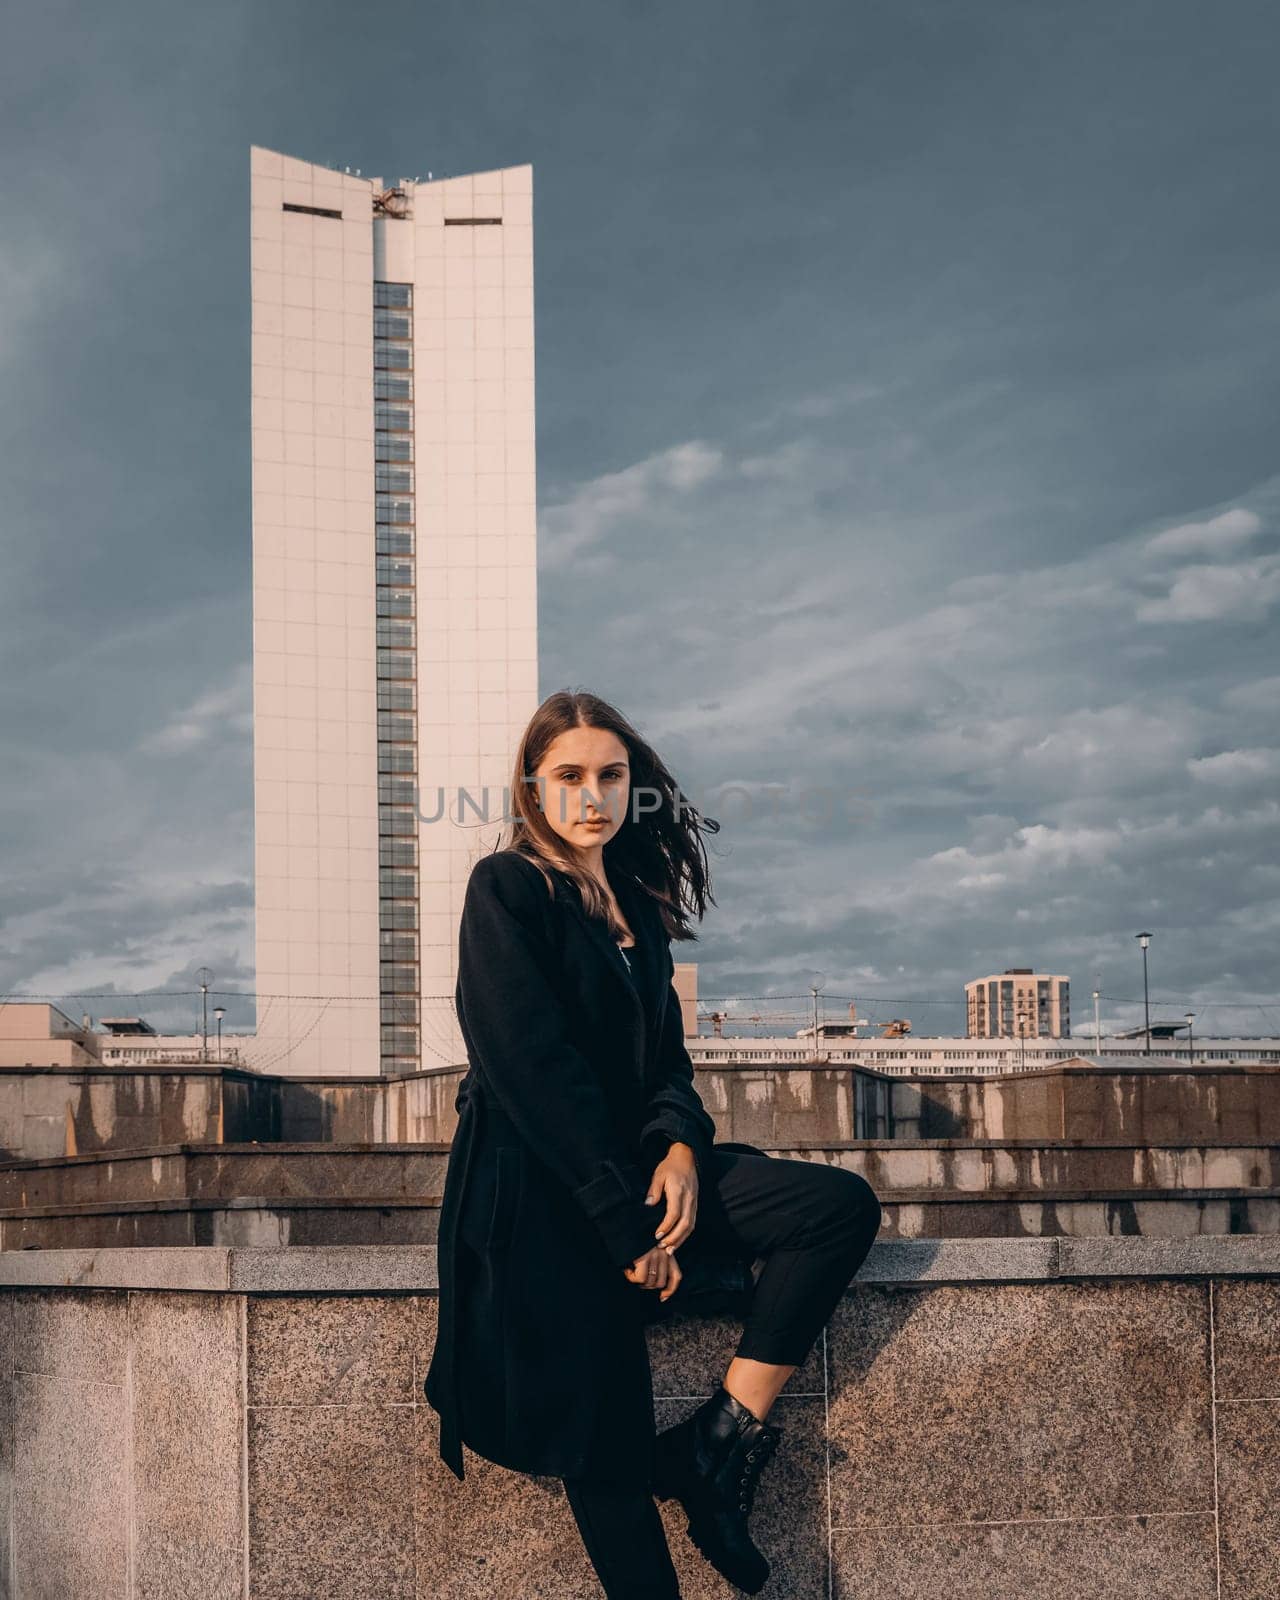 A beautiful girl posing in a city park against the backdrop of a tall building